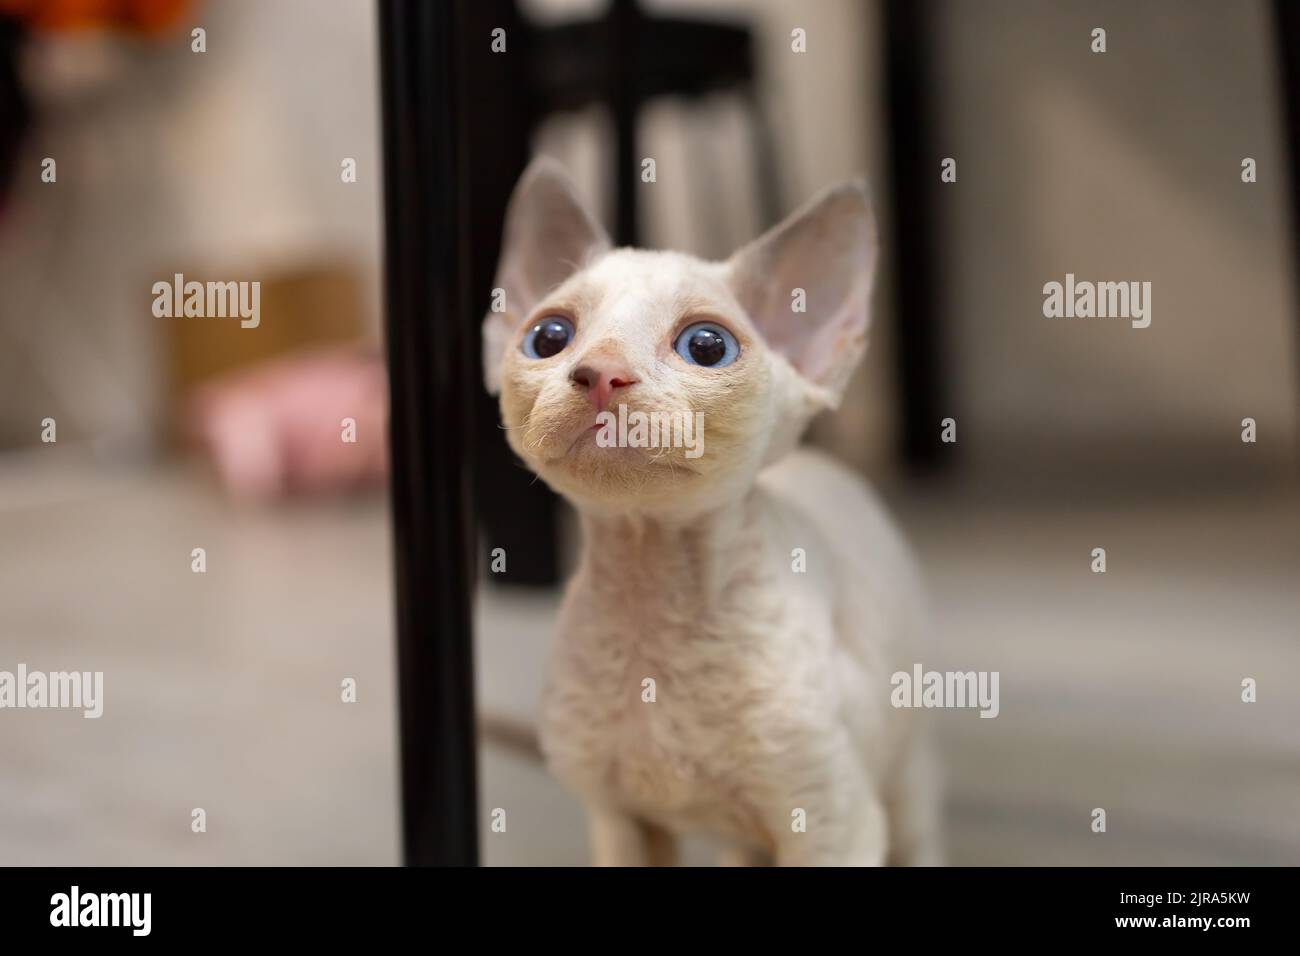 Devon Rex kitten raised his head and looks with compassionate eyes Stock Photo